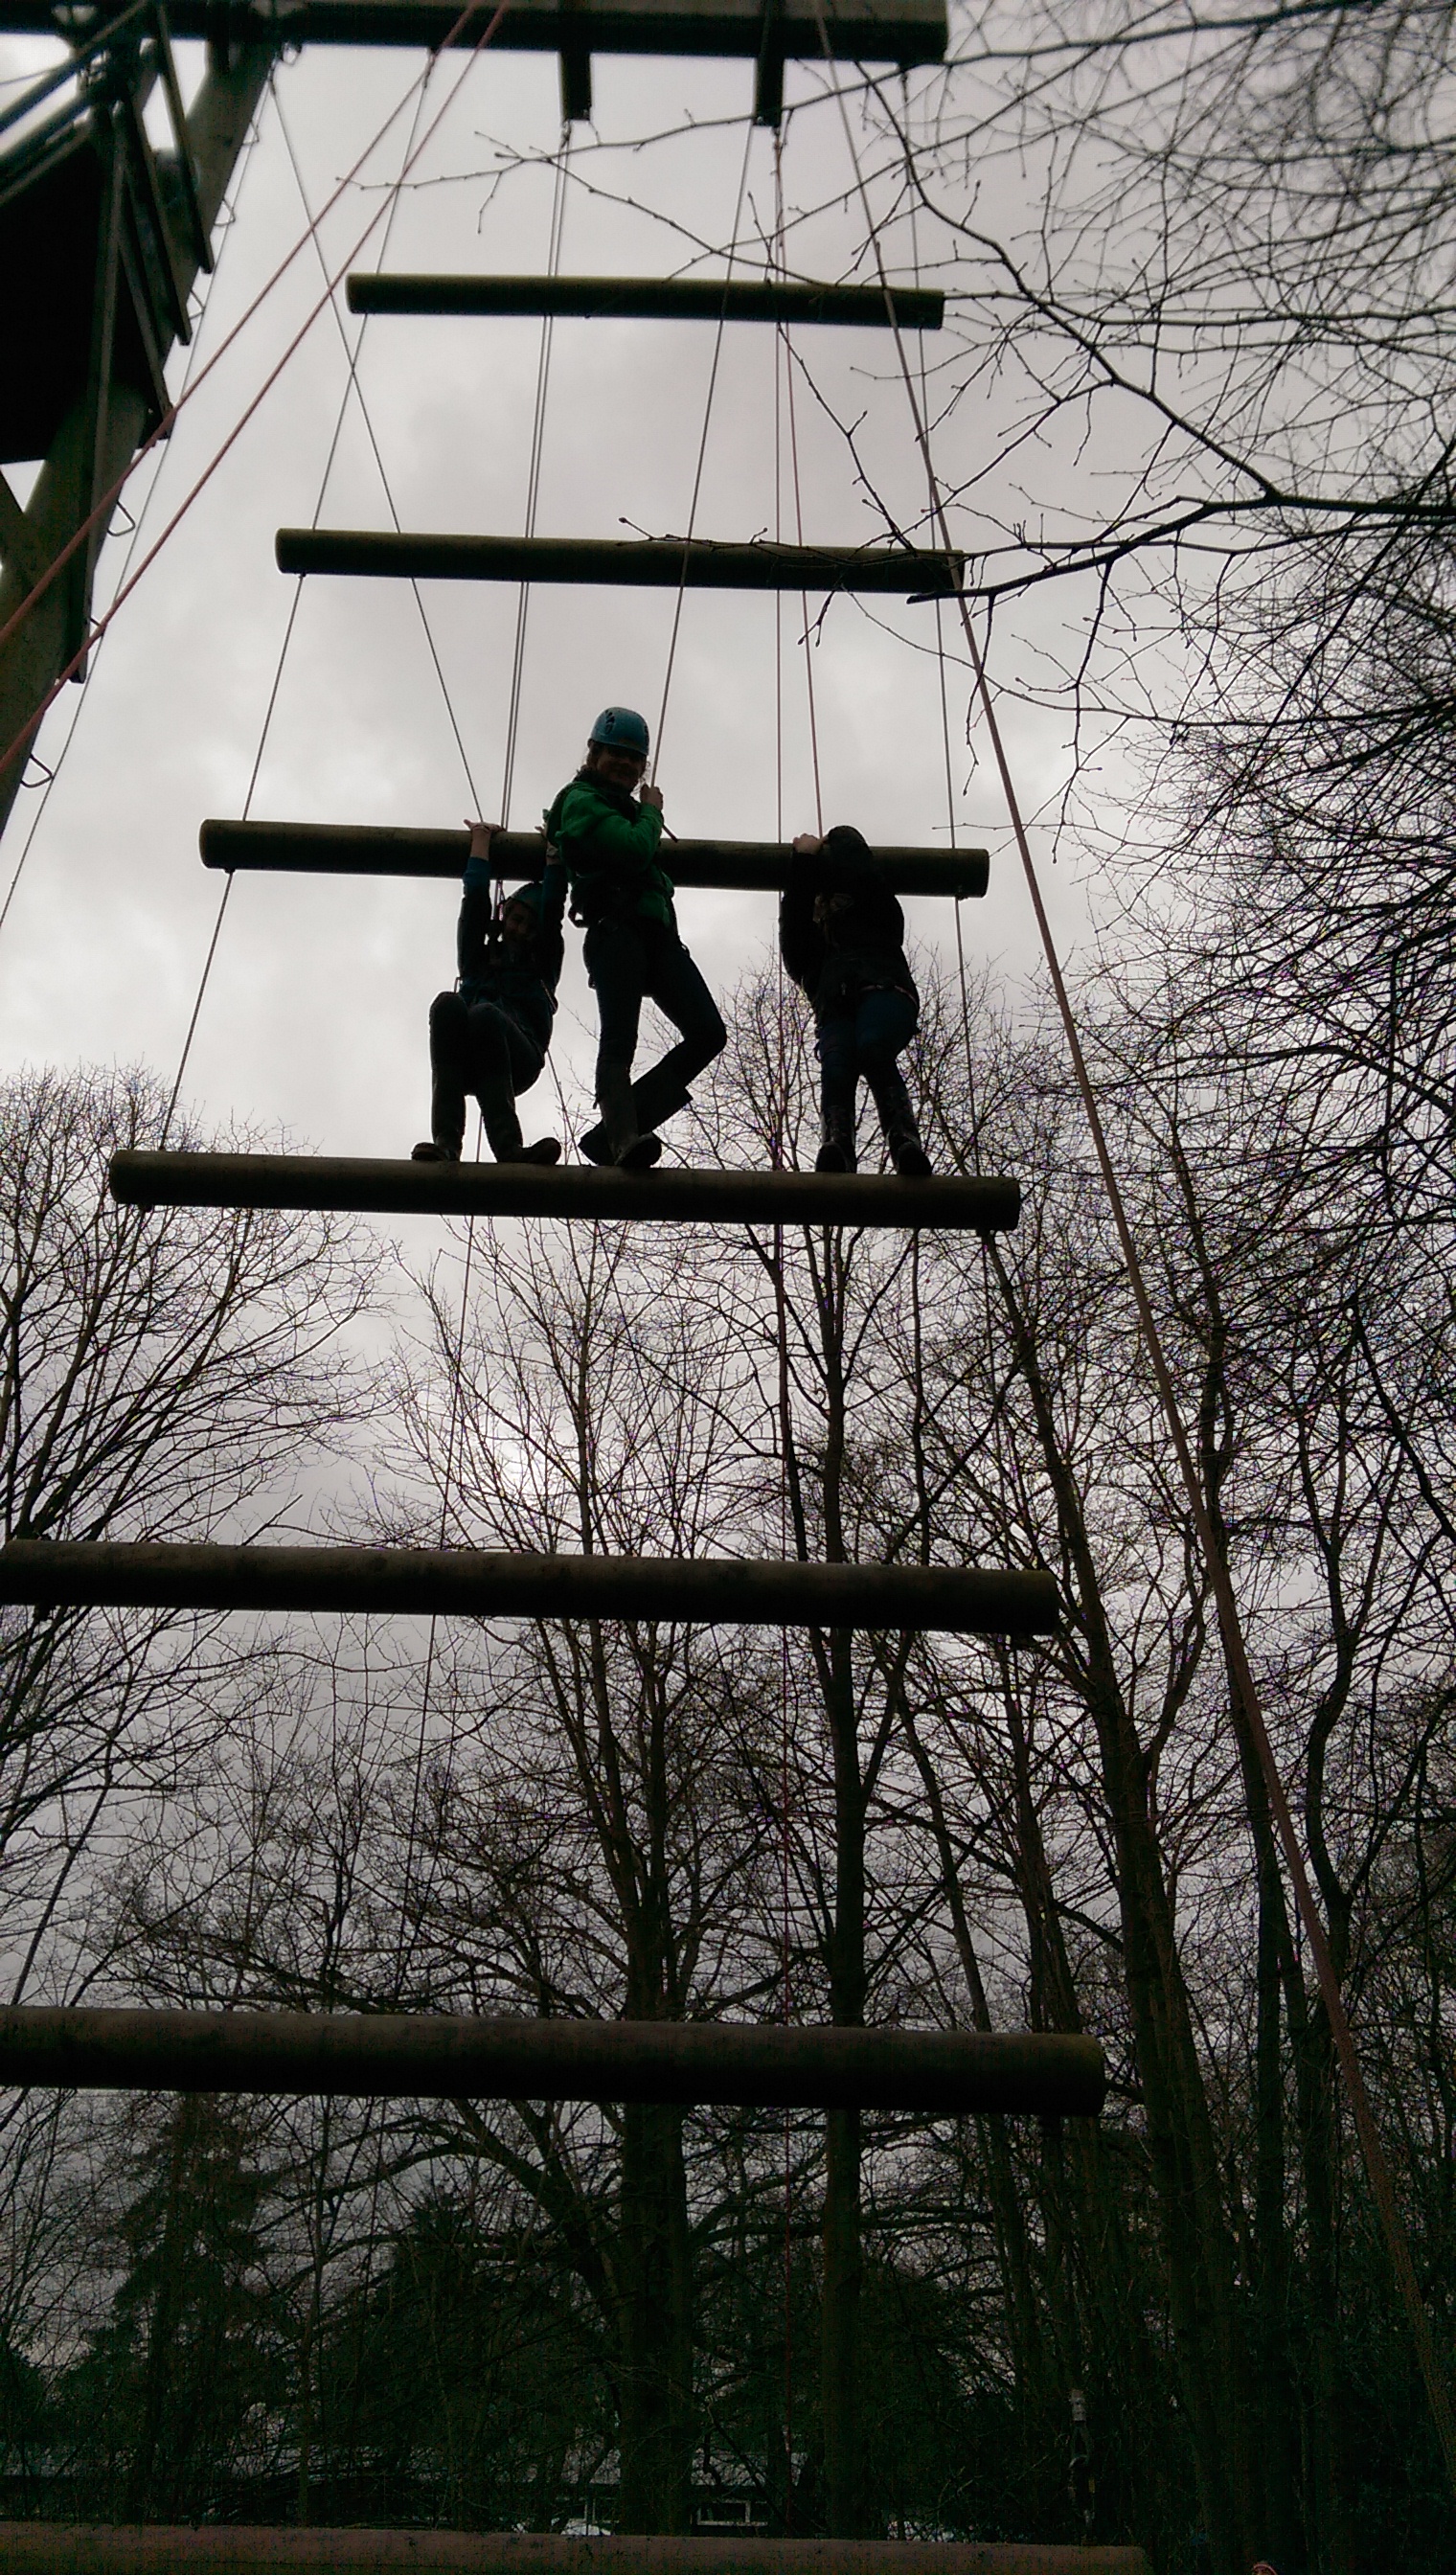 On The High Wires at Wintercamp